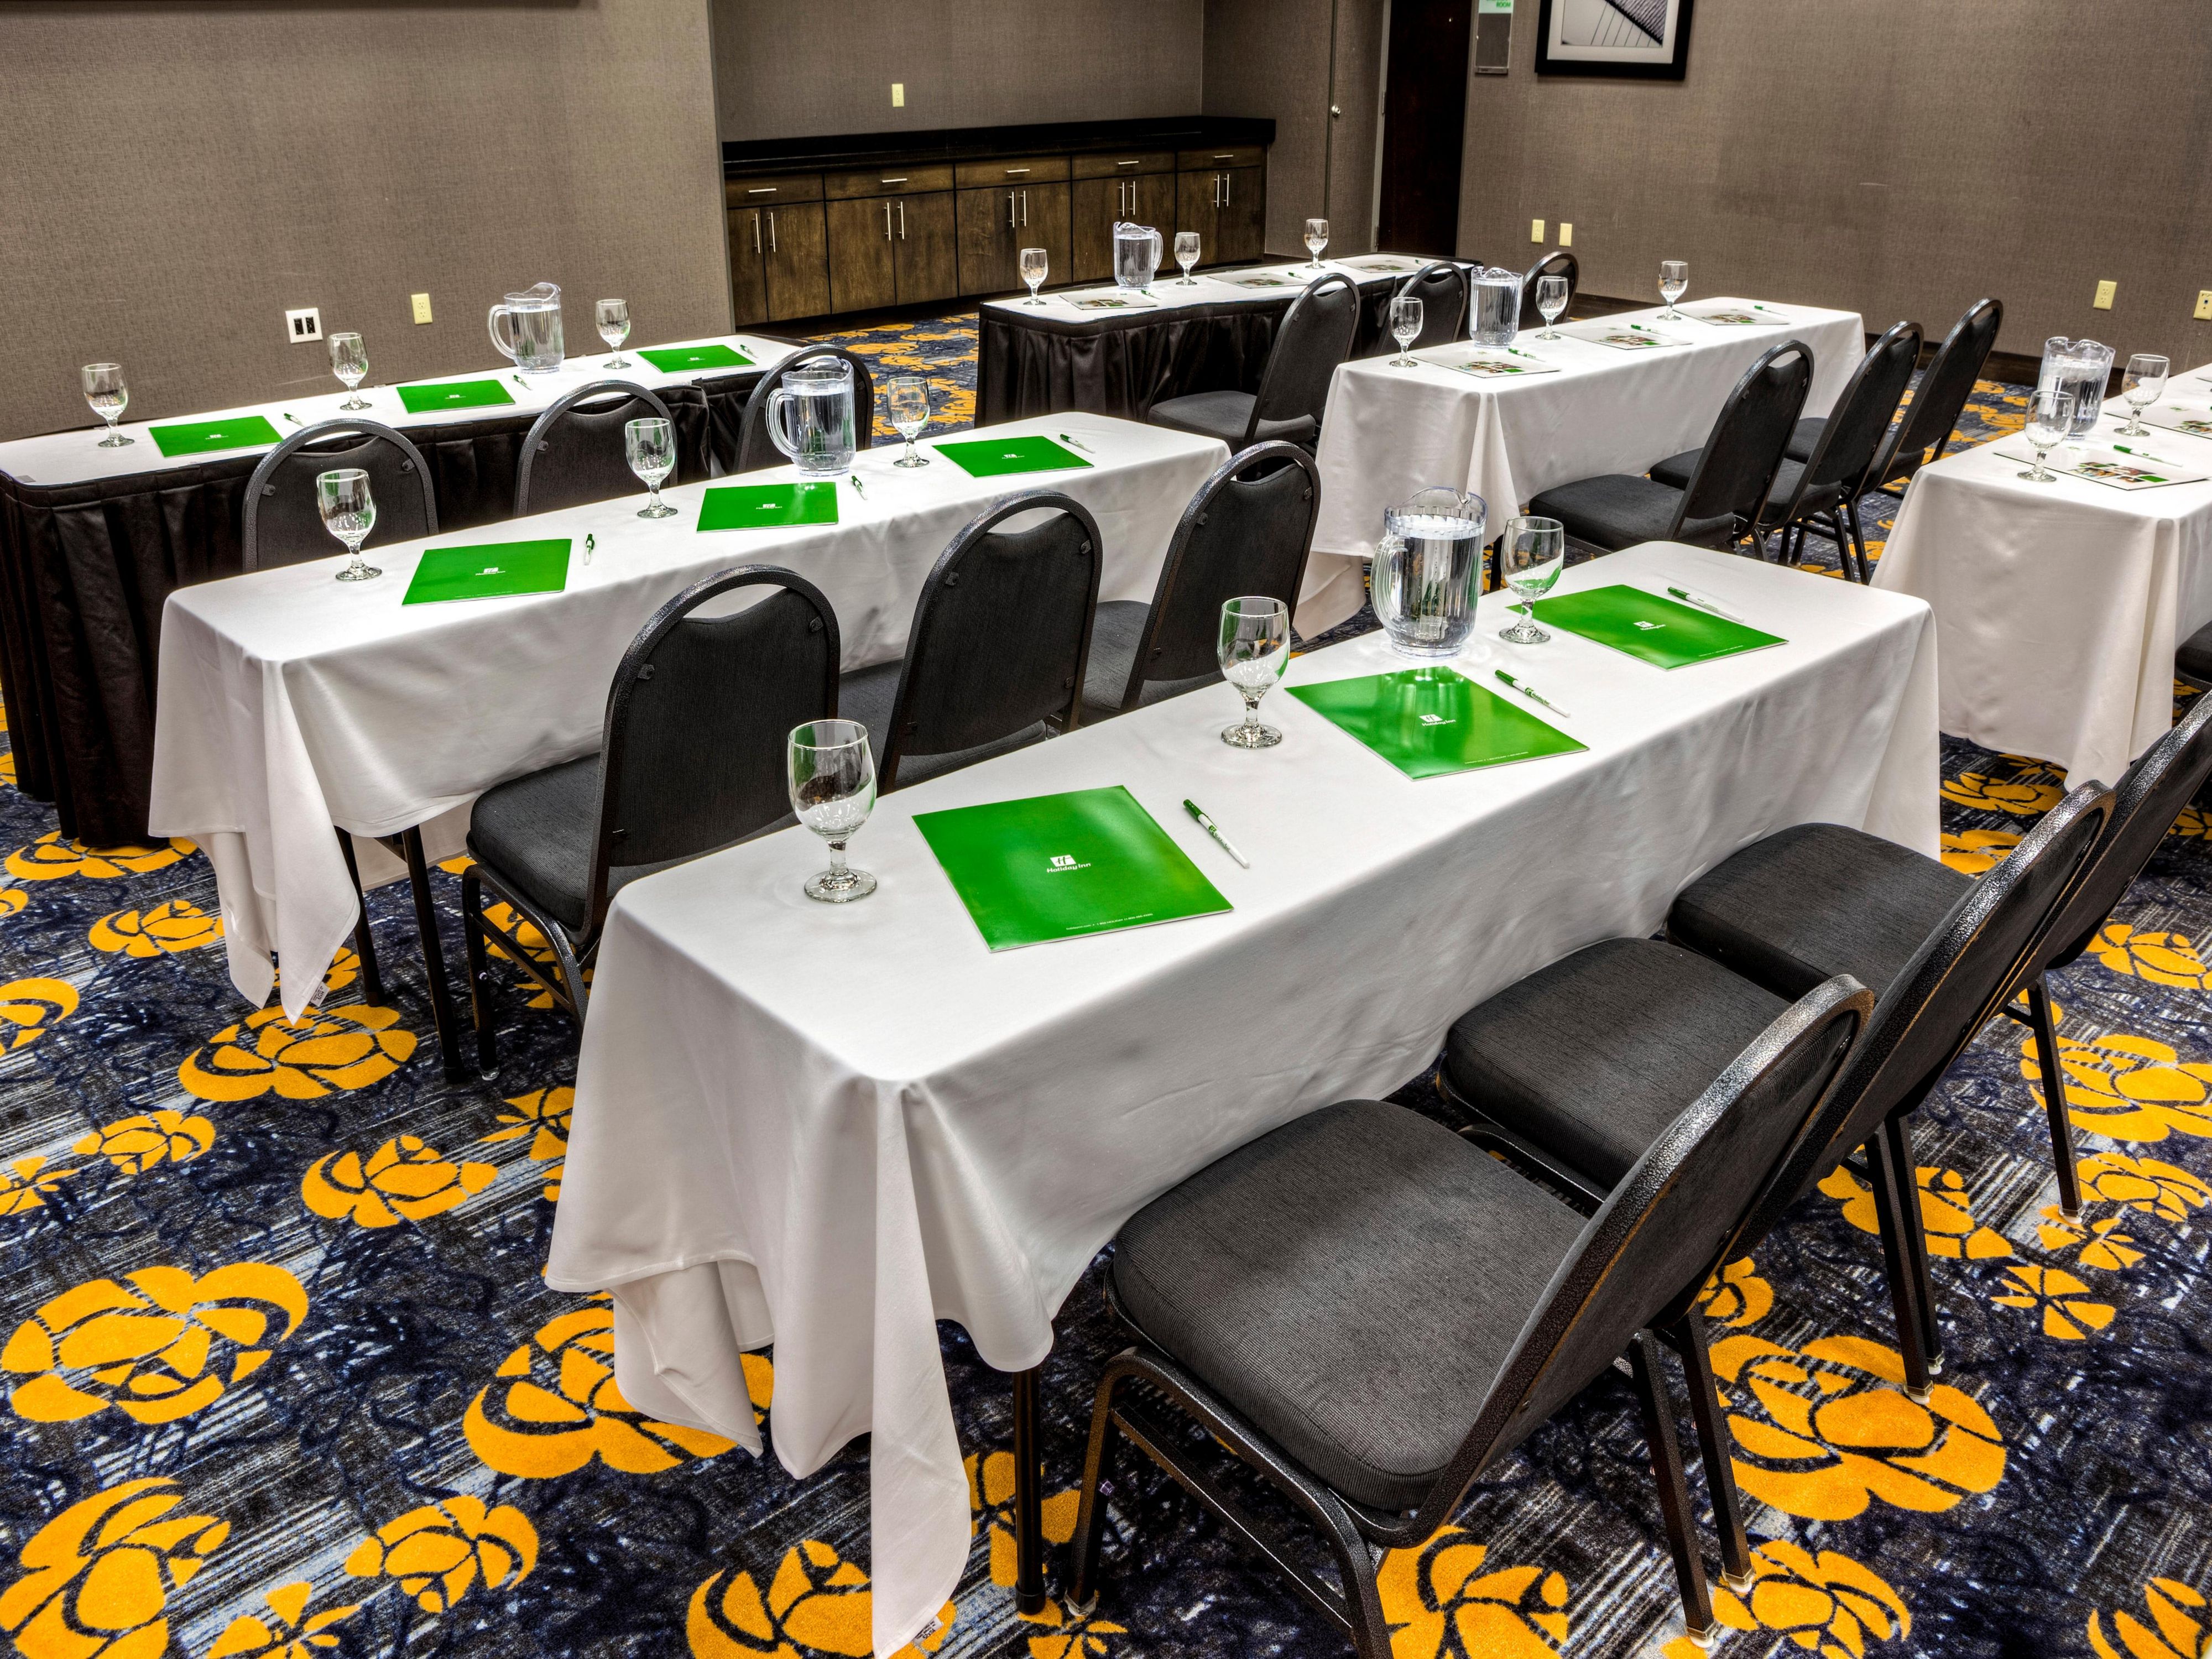 Flexible meeting space to accommodate up to 250 people for meetings, events and special occasions. Fully set Executive Boardroom sits 14 people with conference phone and A/V capabilities. Discover world class service without the big city hassle.  Welcome to the Holiday Inn Richmond! 